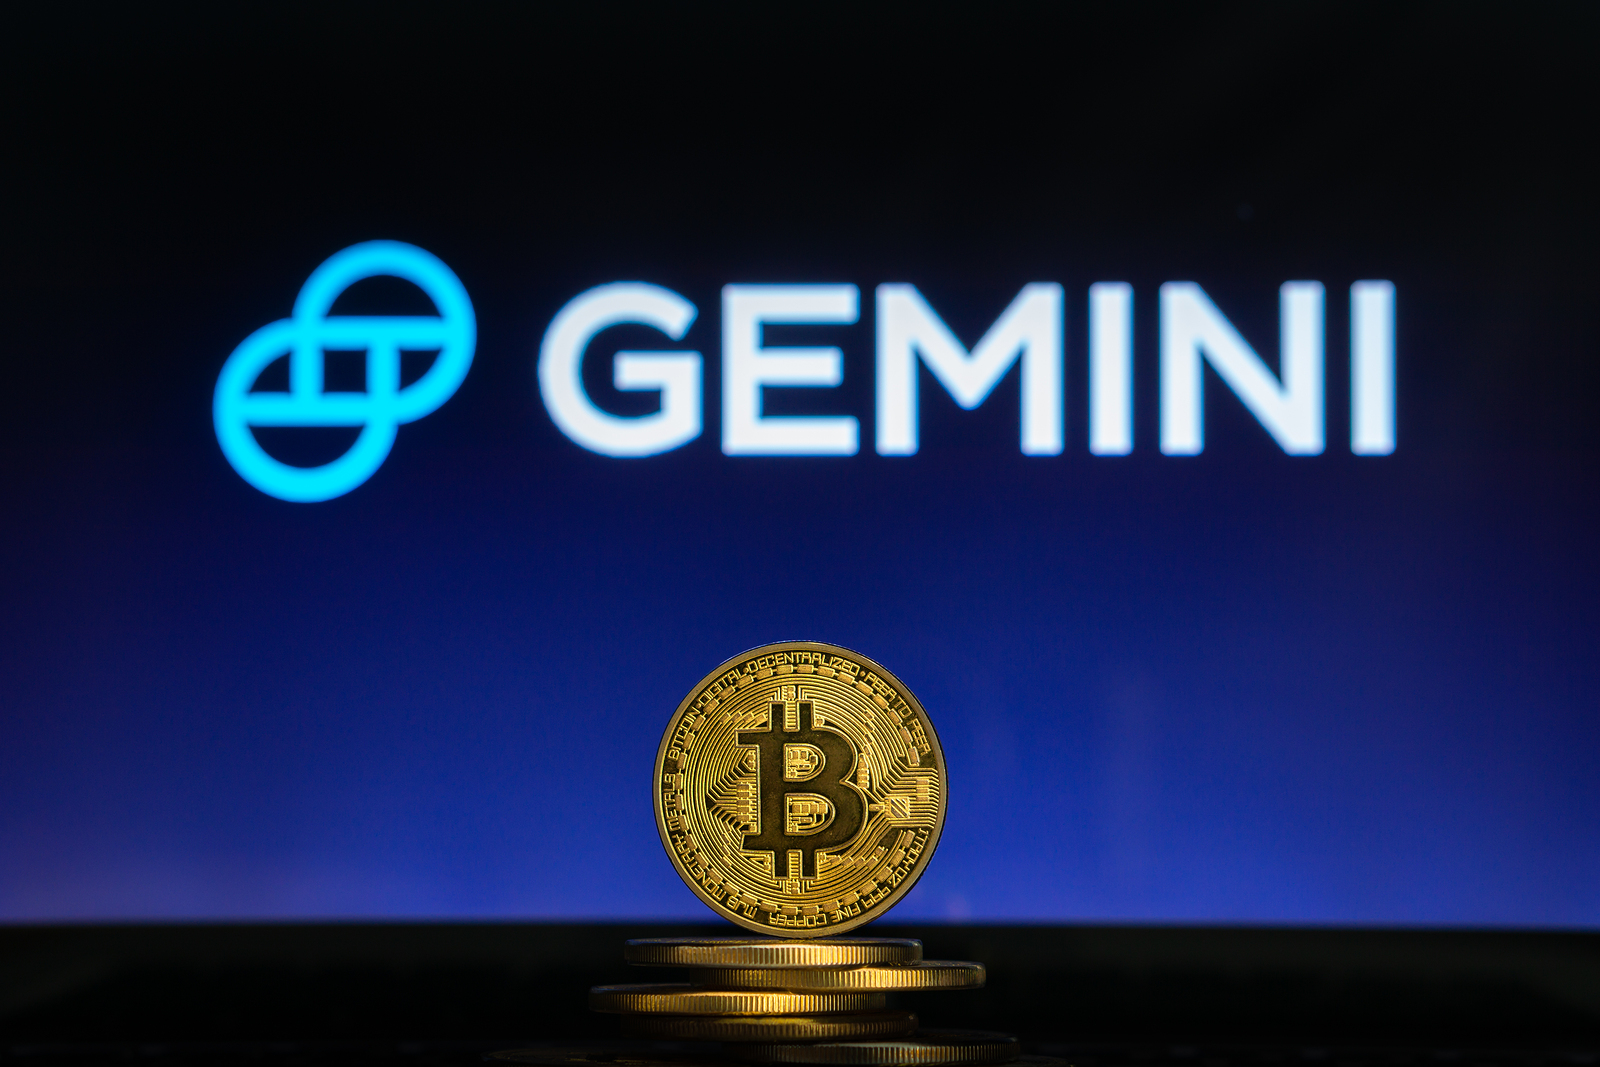 Gemini - Definition, What is Gemini, Advantages of Gemini, and Latest News - ClearTax